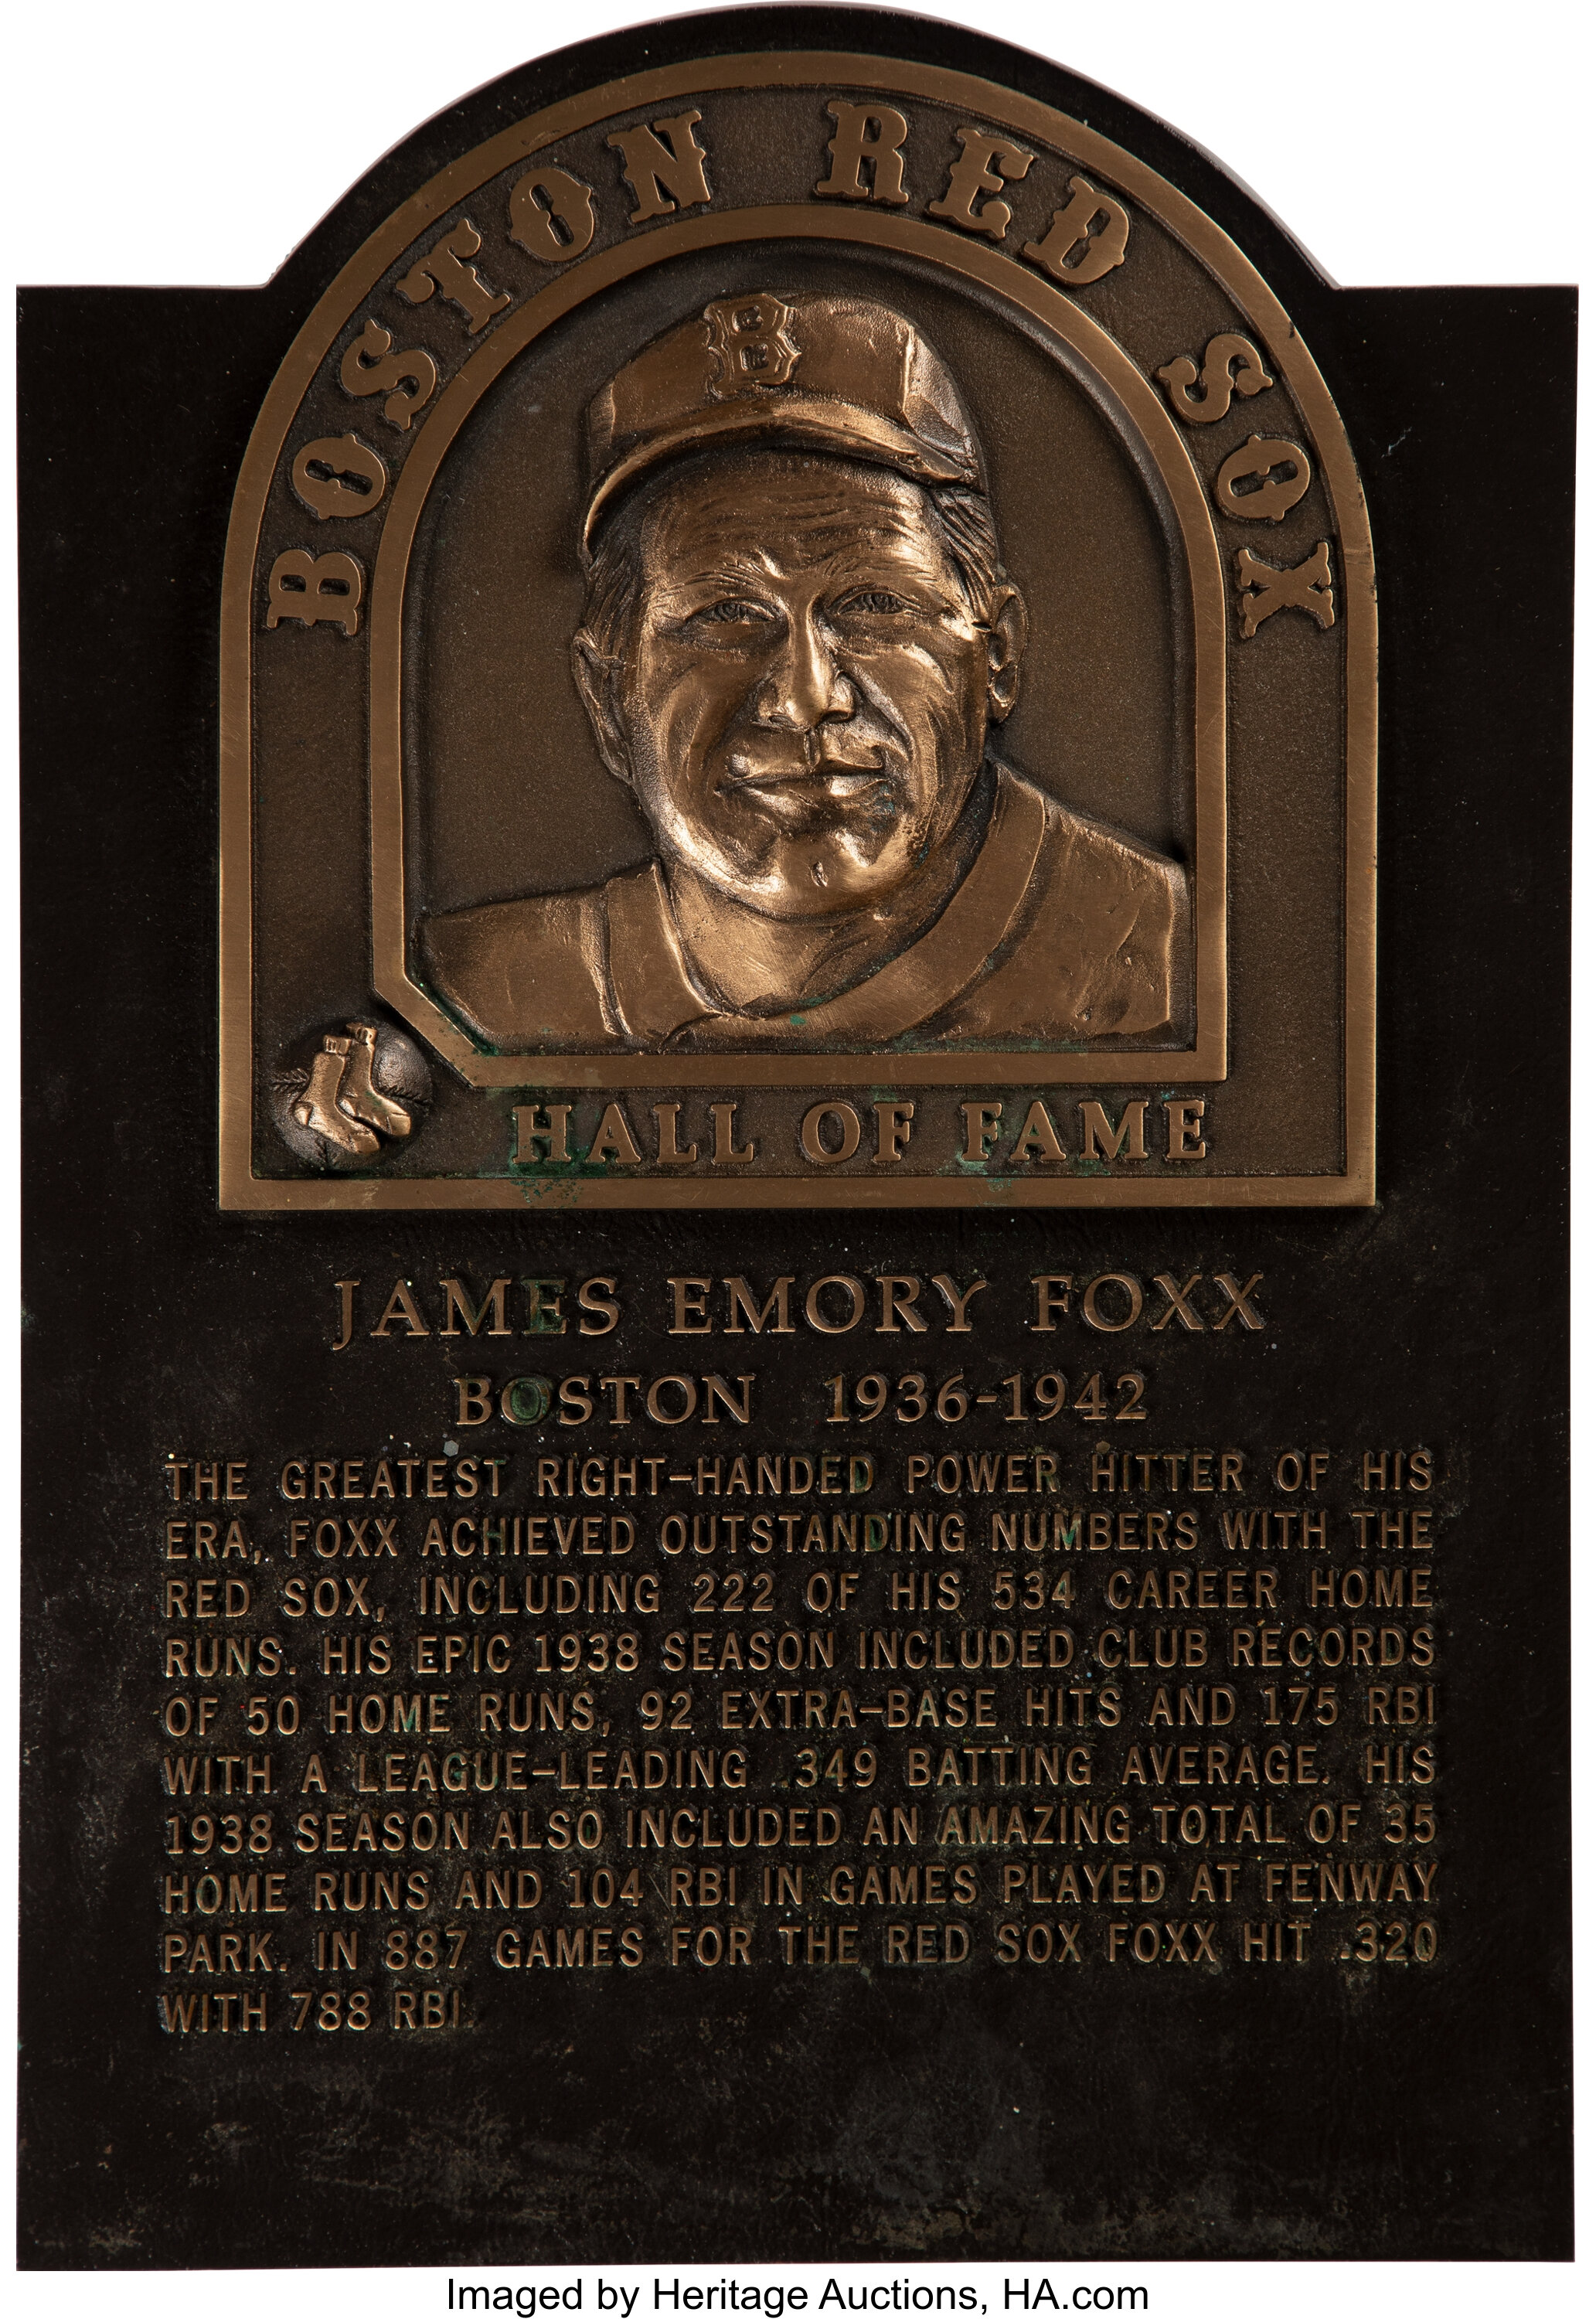 FenwayNation: Time To Retire Jimmie Foxx's Red Sox Number 3